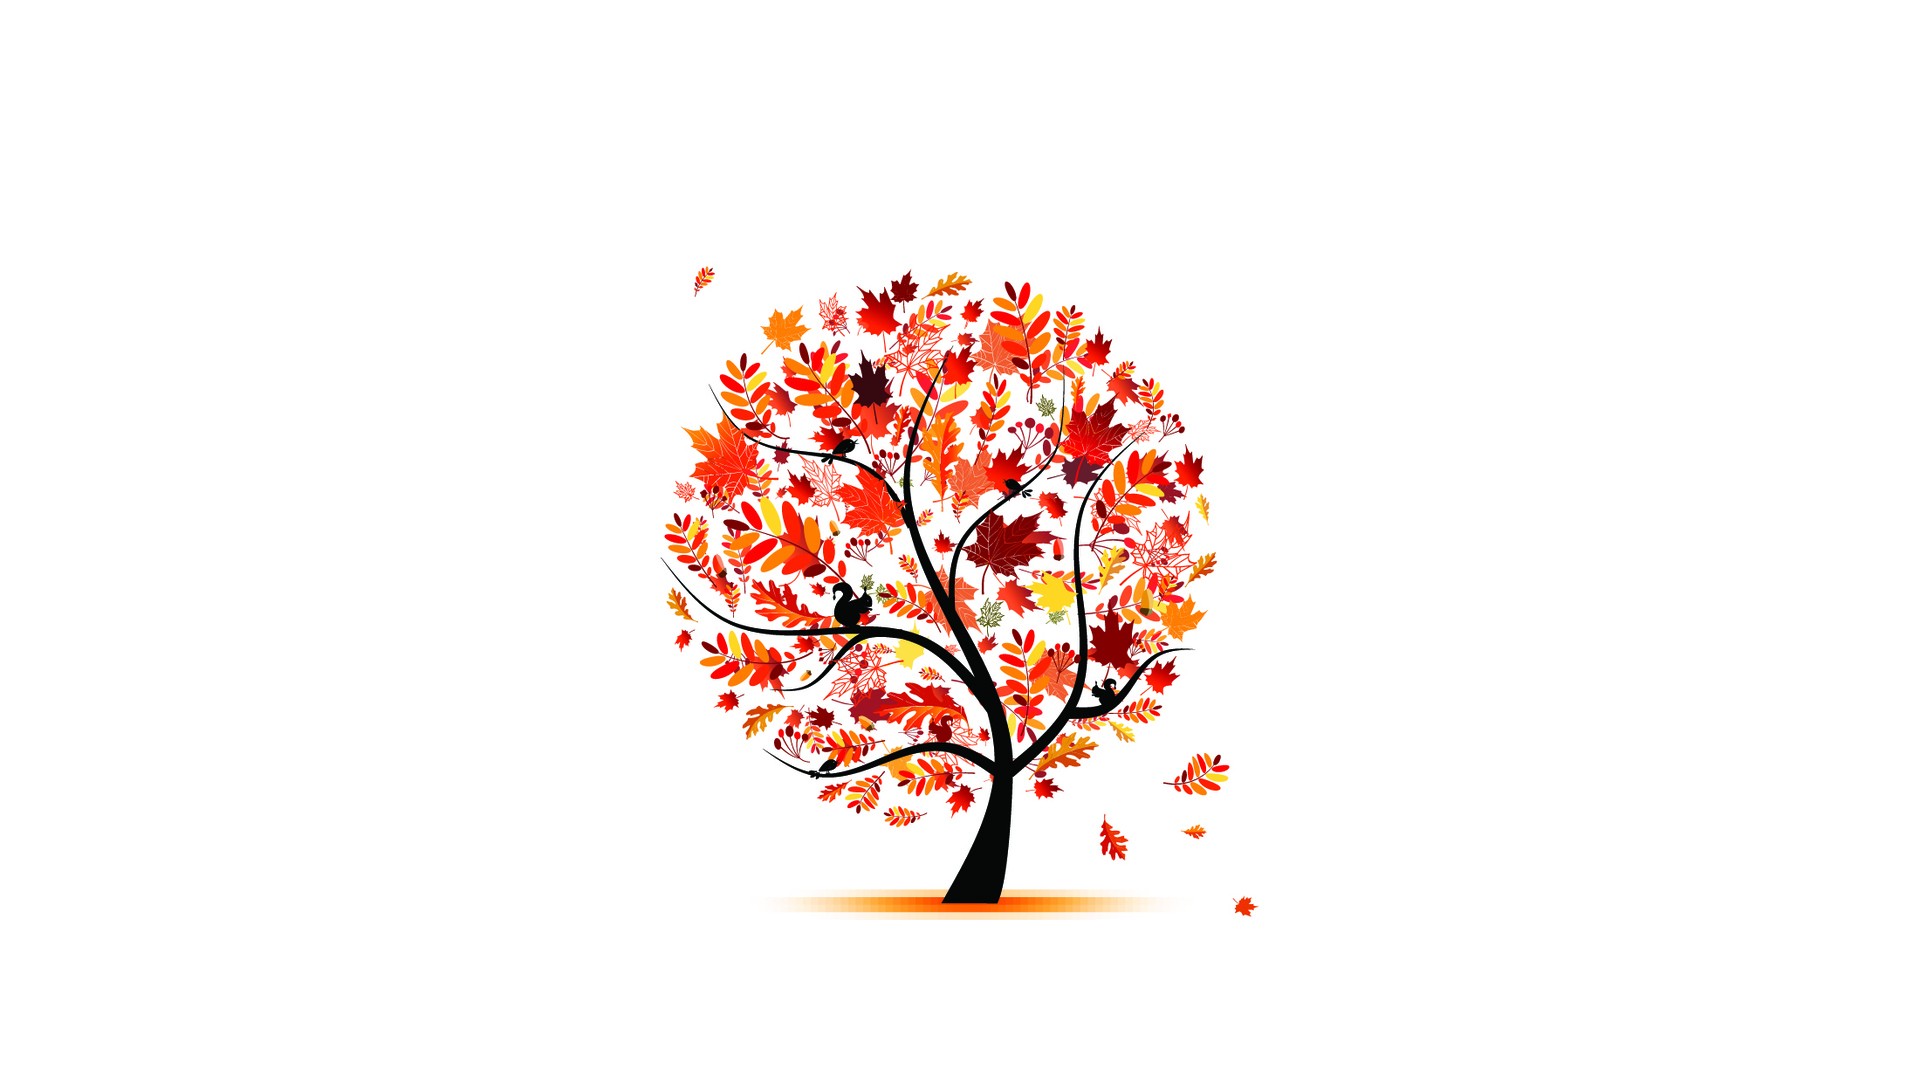 trees, Autumn, Leaves, Artwork, Simple, Background, White